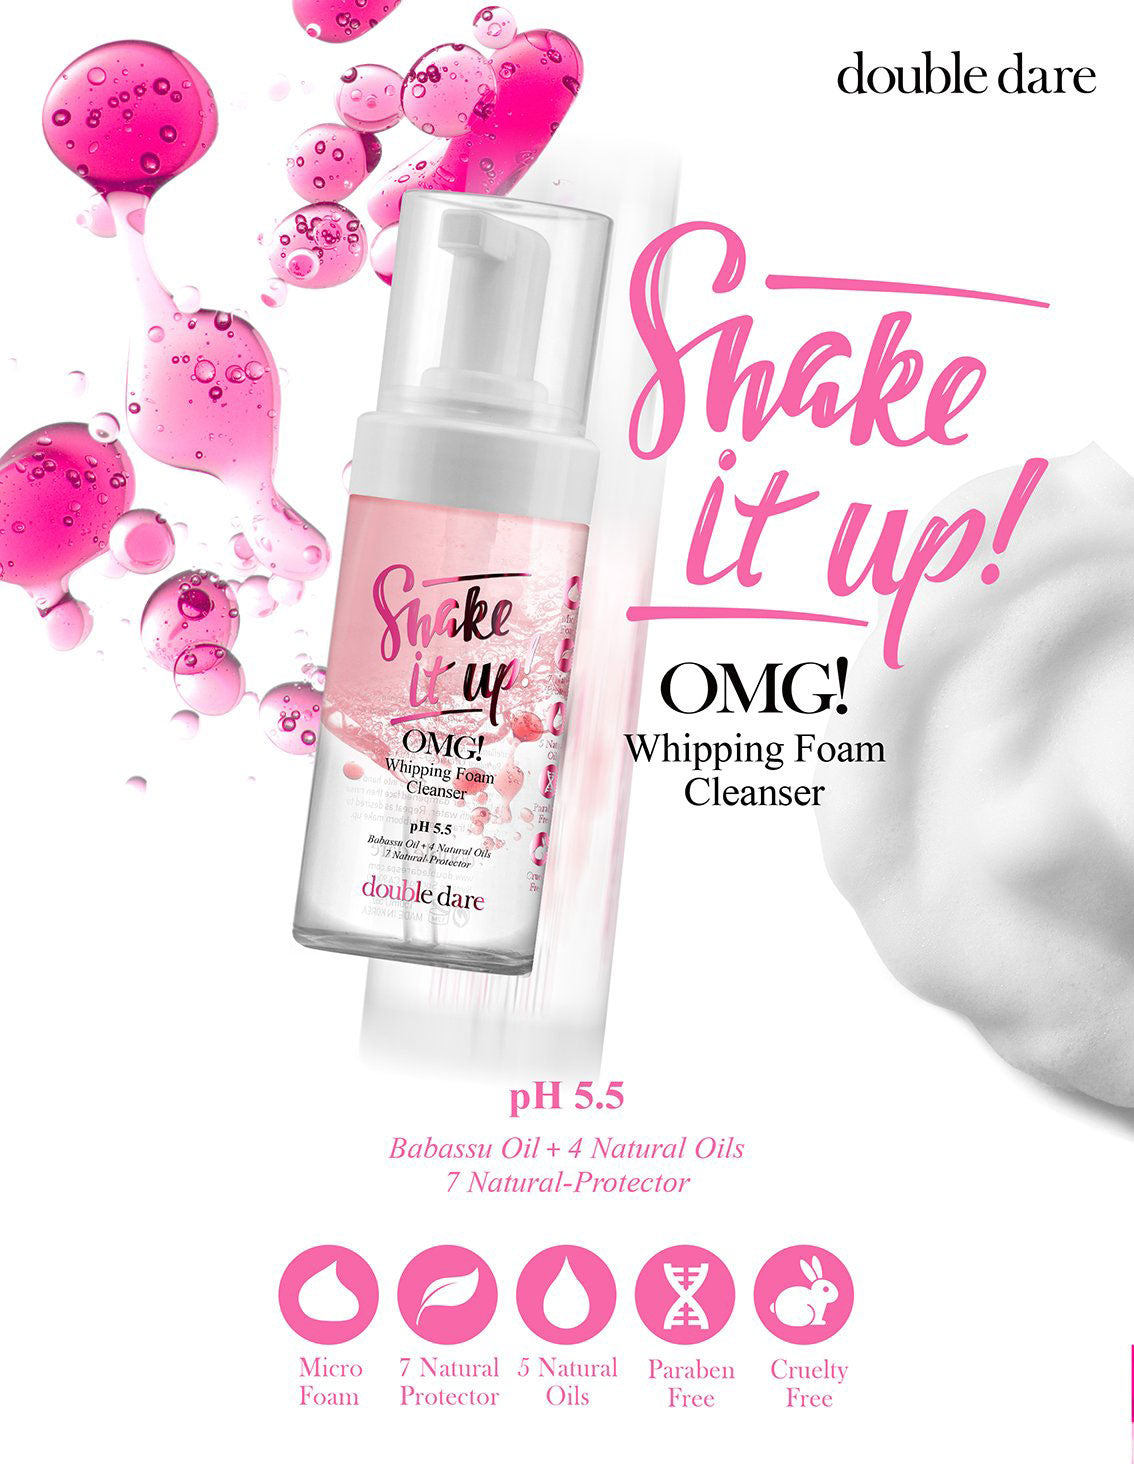 Double Dare Shake it up! OMG! Whipping Foam Cleanser